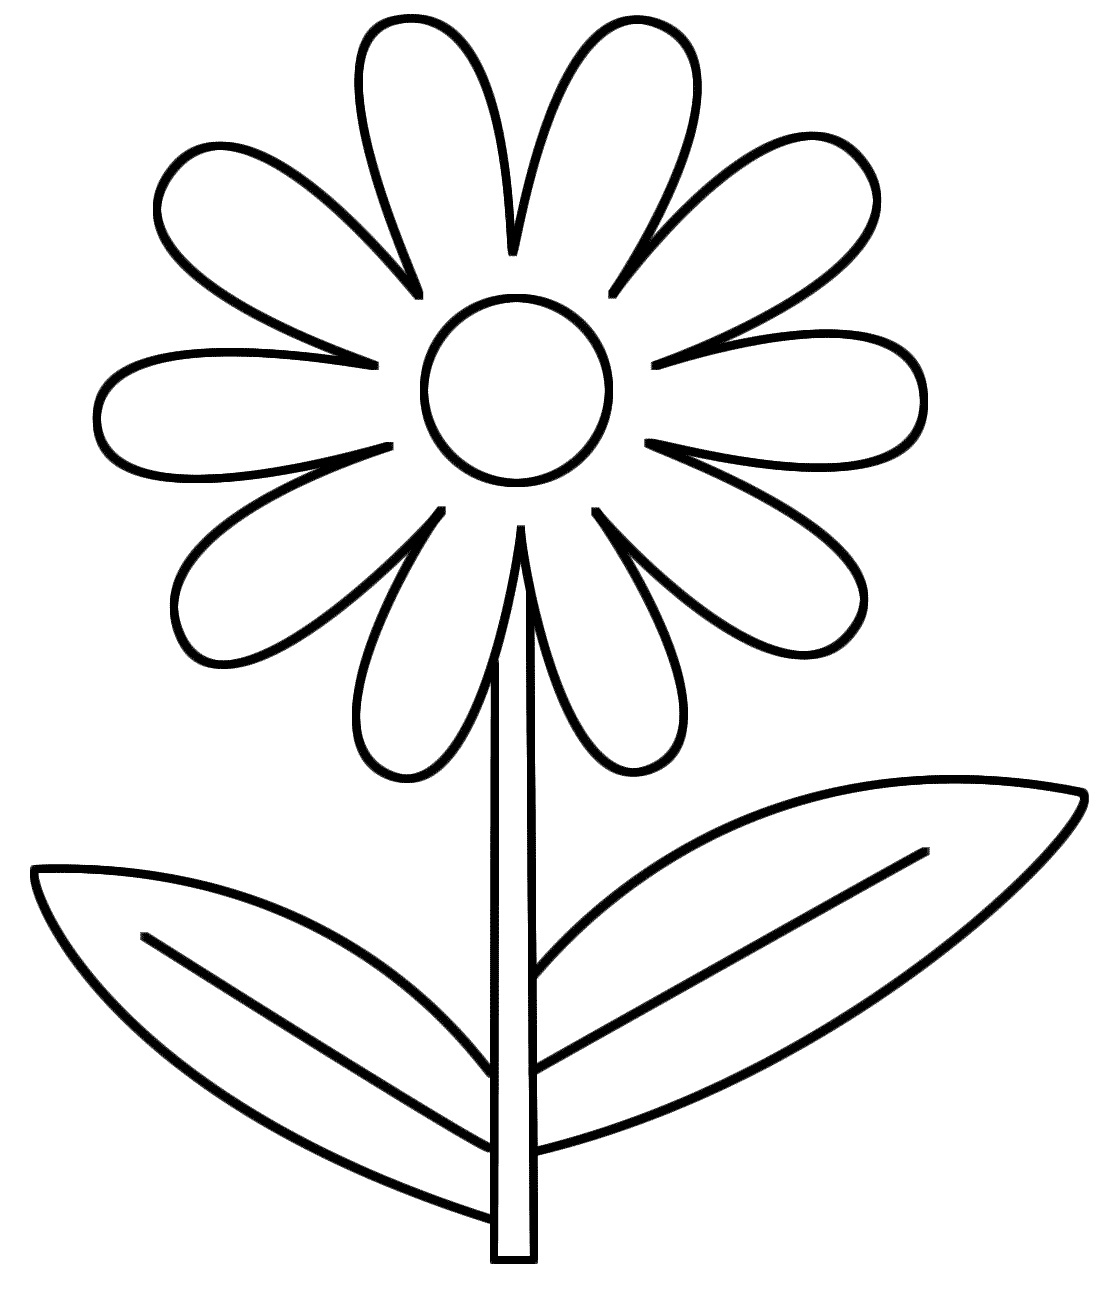 Coloring Pages Free Flowers - Coloring